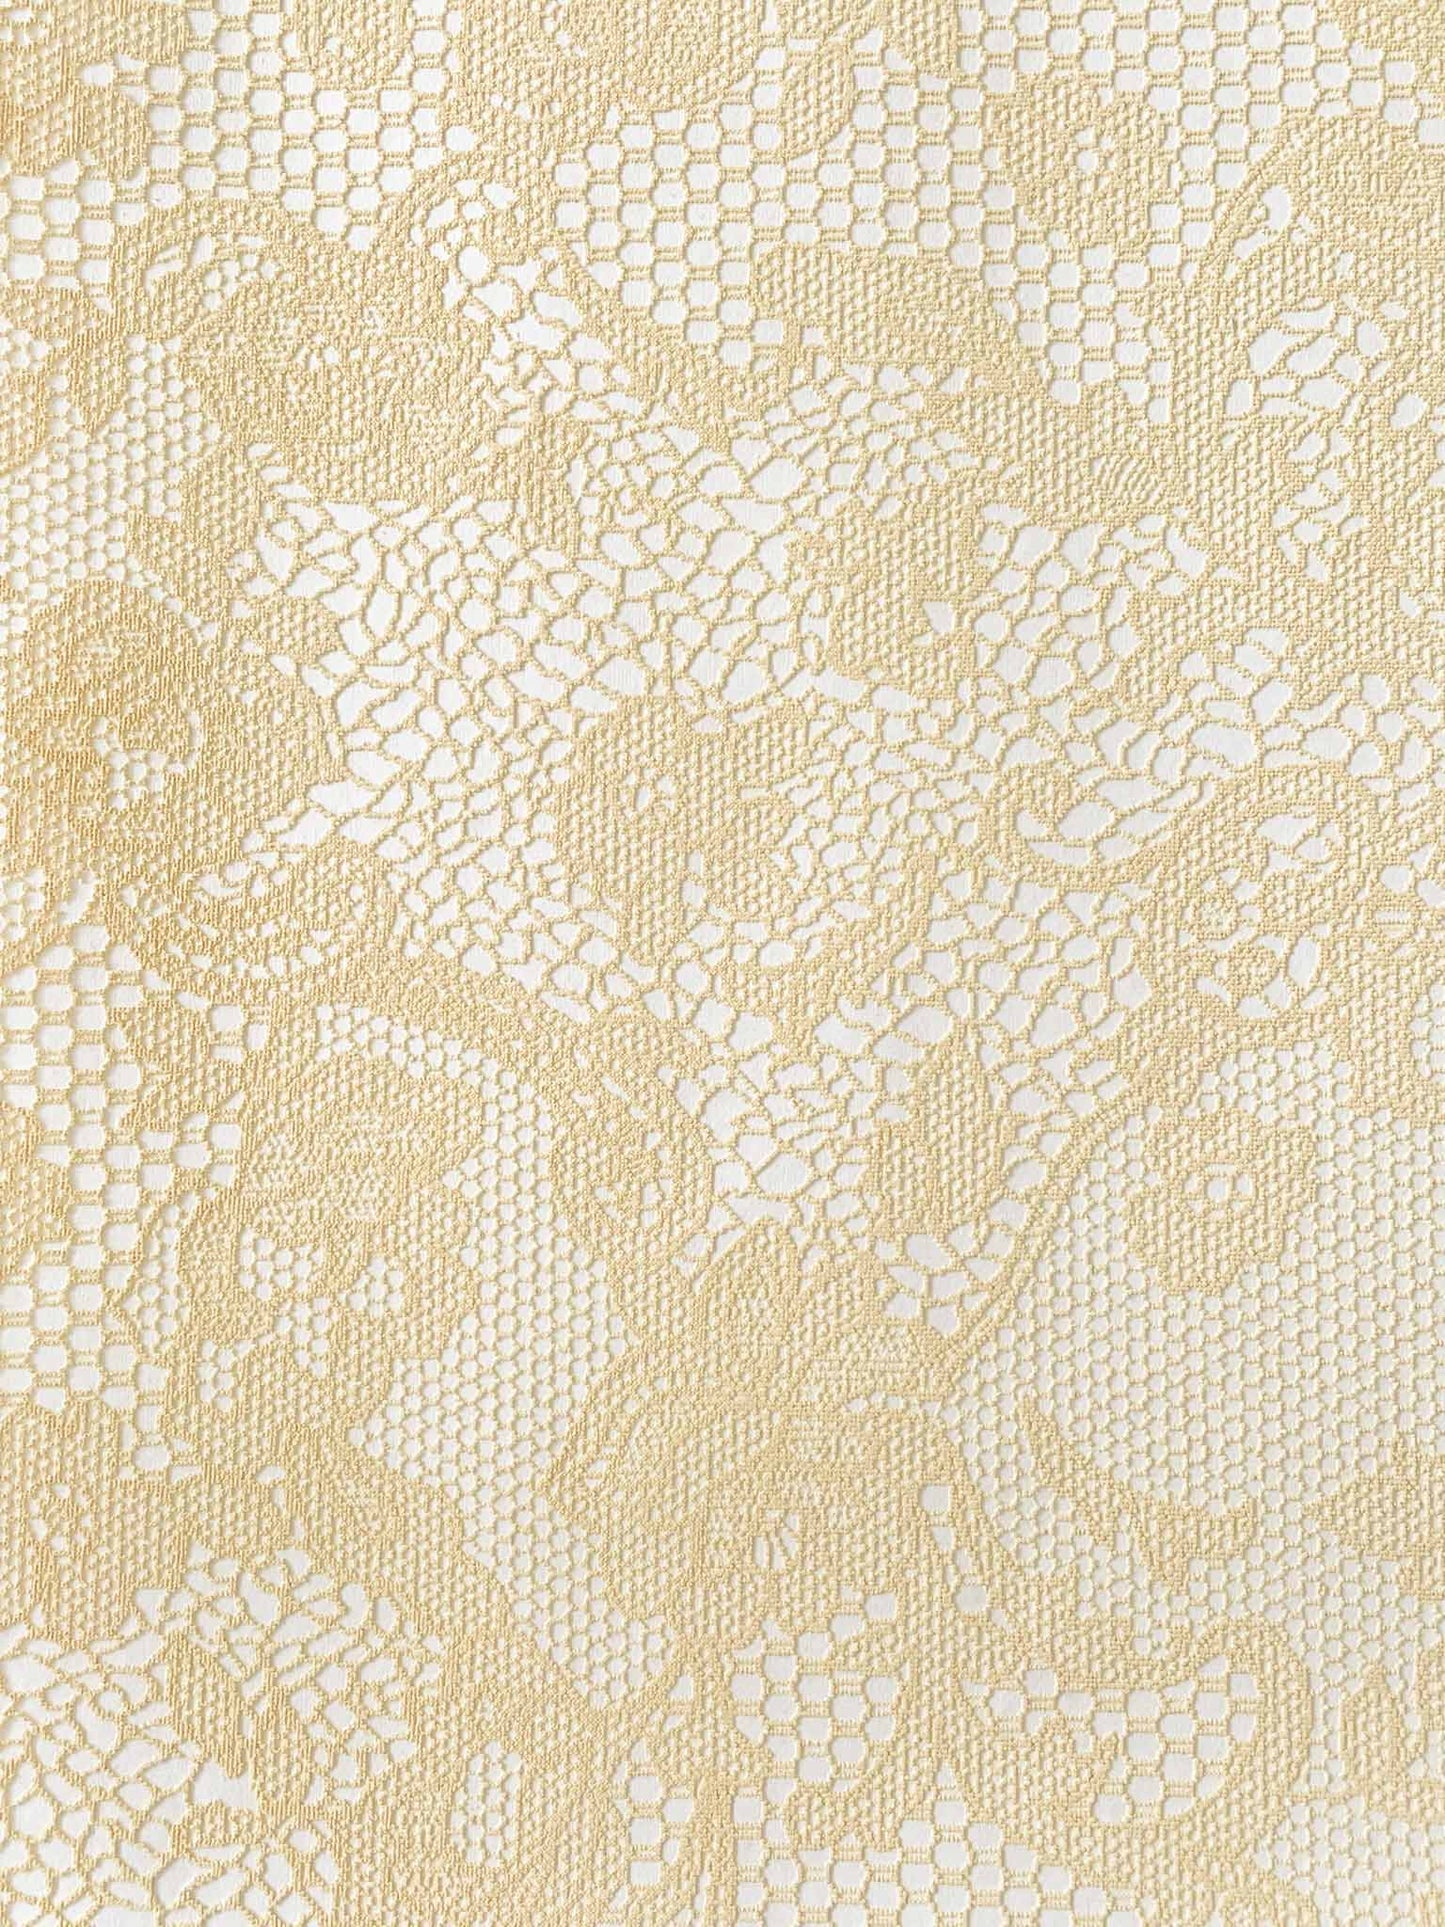 Chantilly Embossed Paper in Cream on White  ImagineDIY   